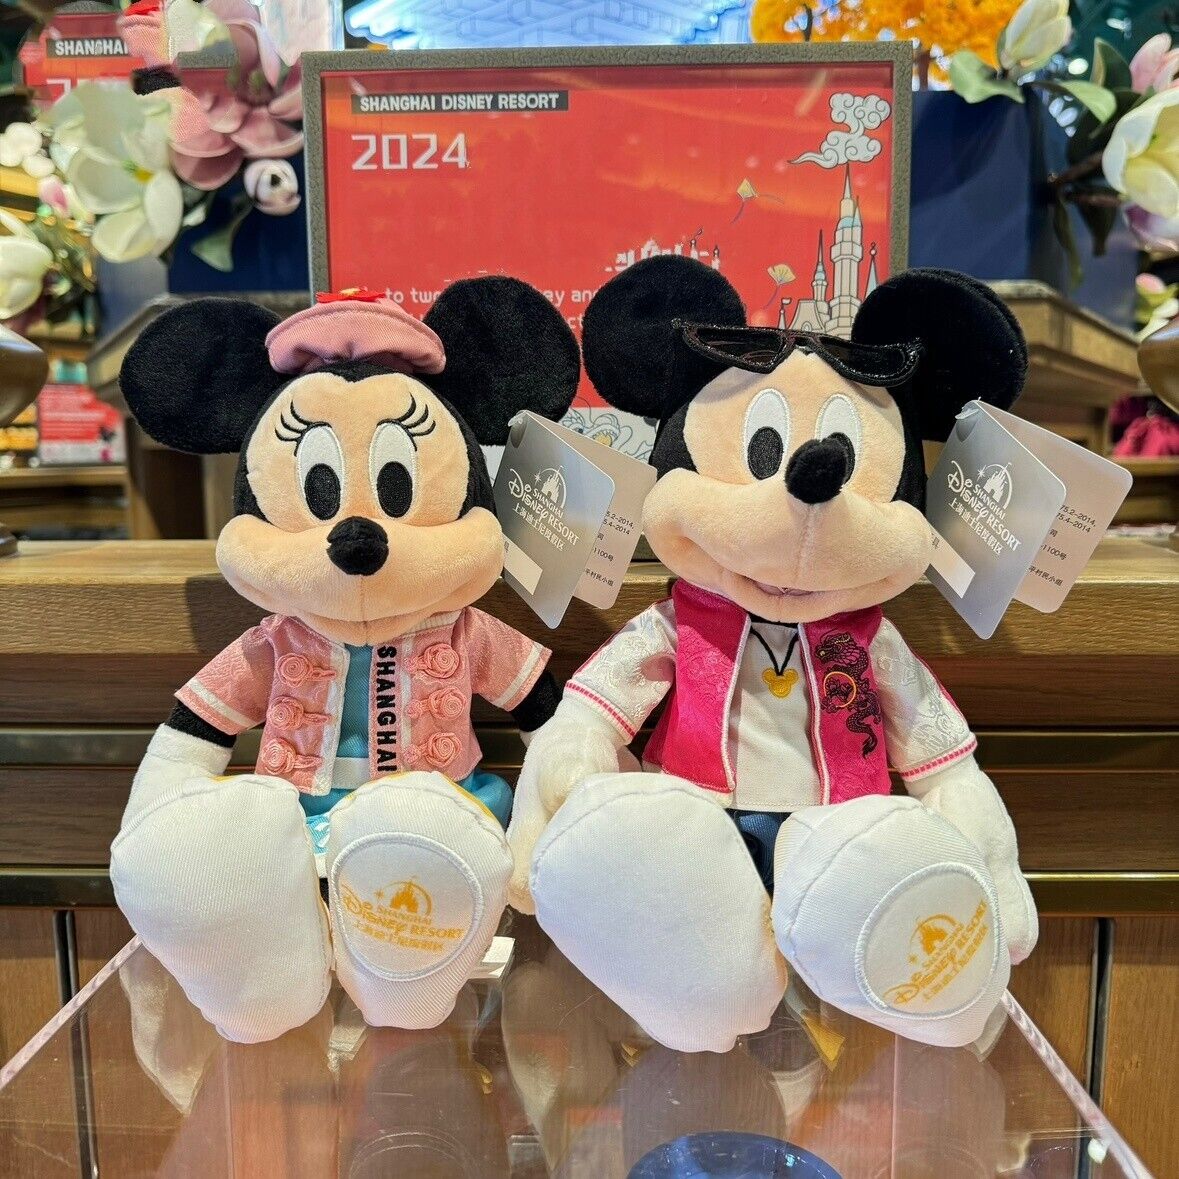 Disney Authentic 2024 Dragon New Year Mickey Minnie Mouse Plush 11inches NEW